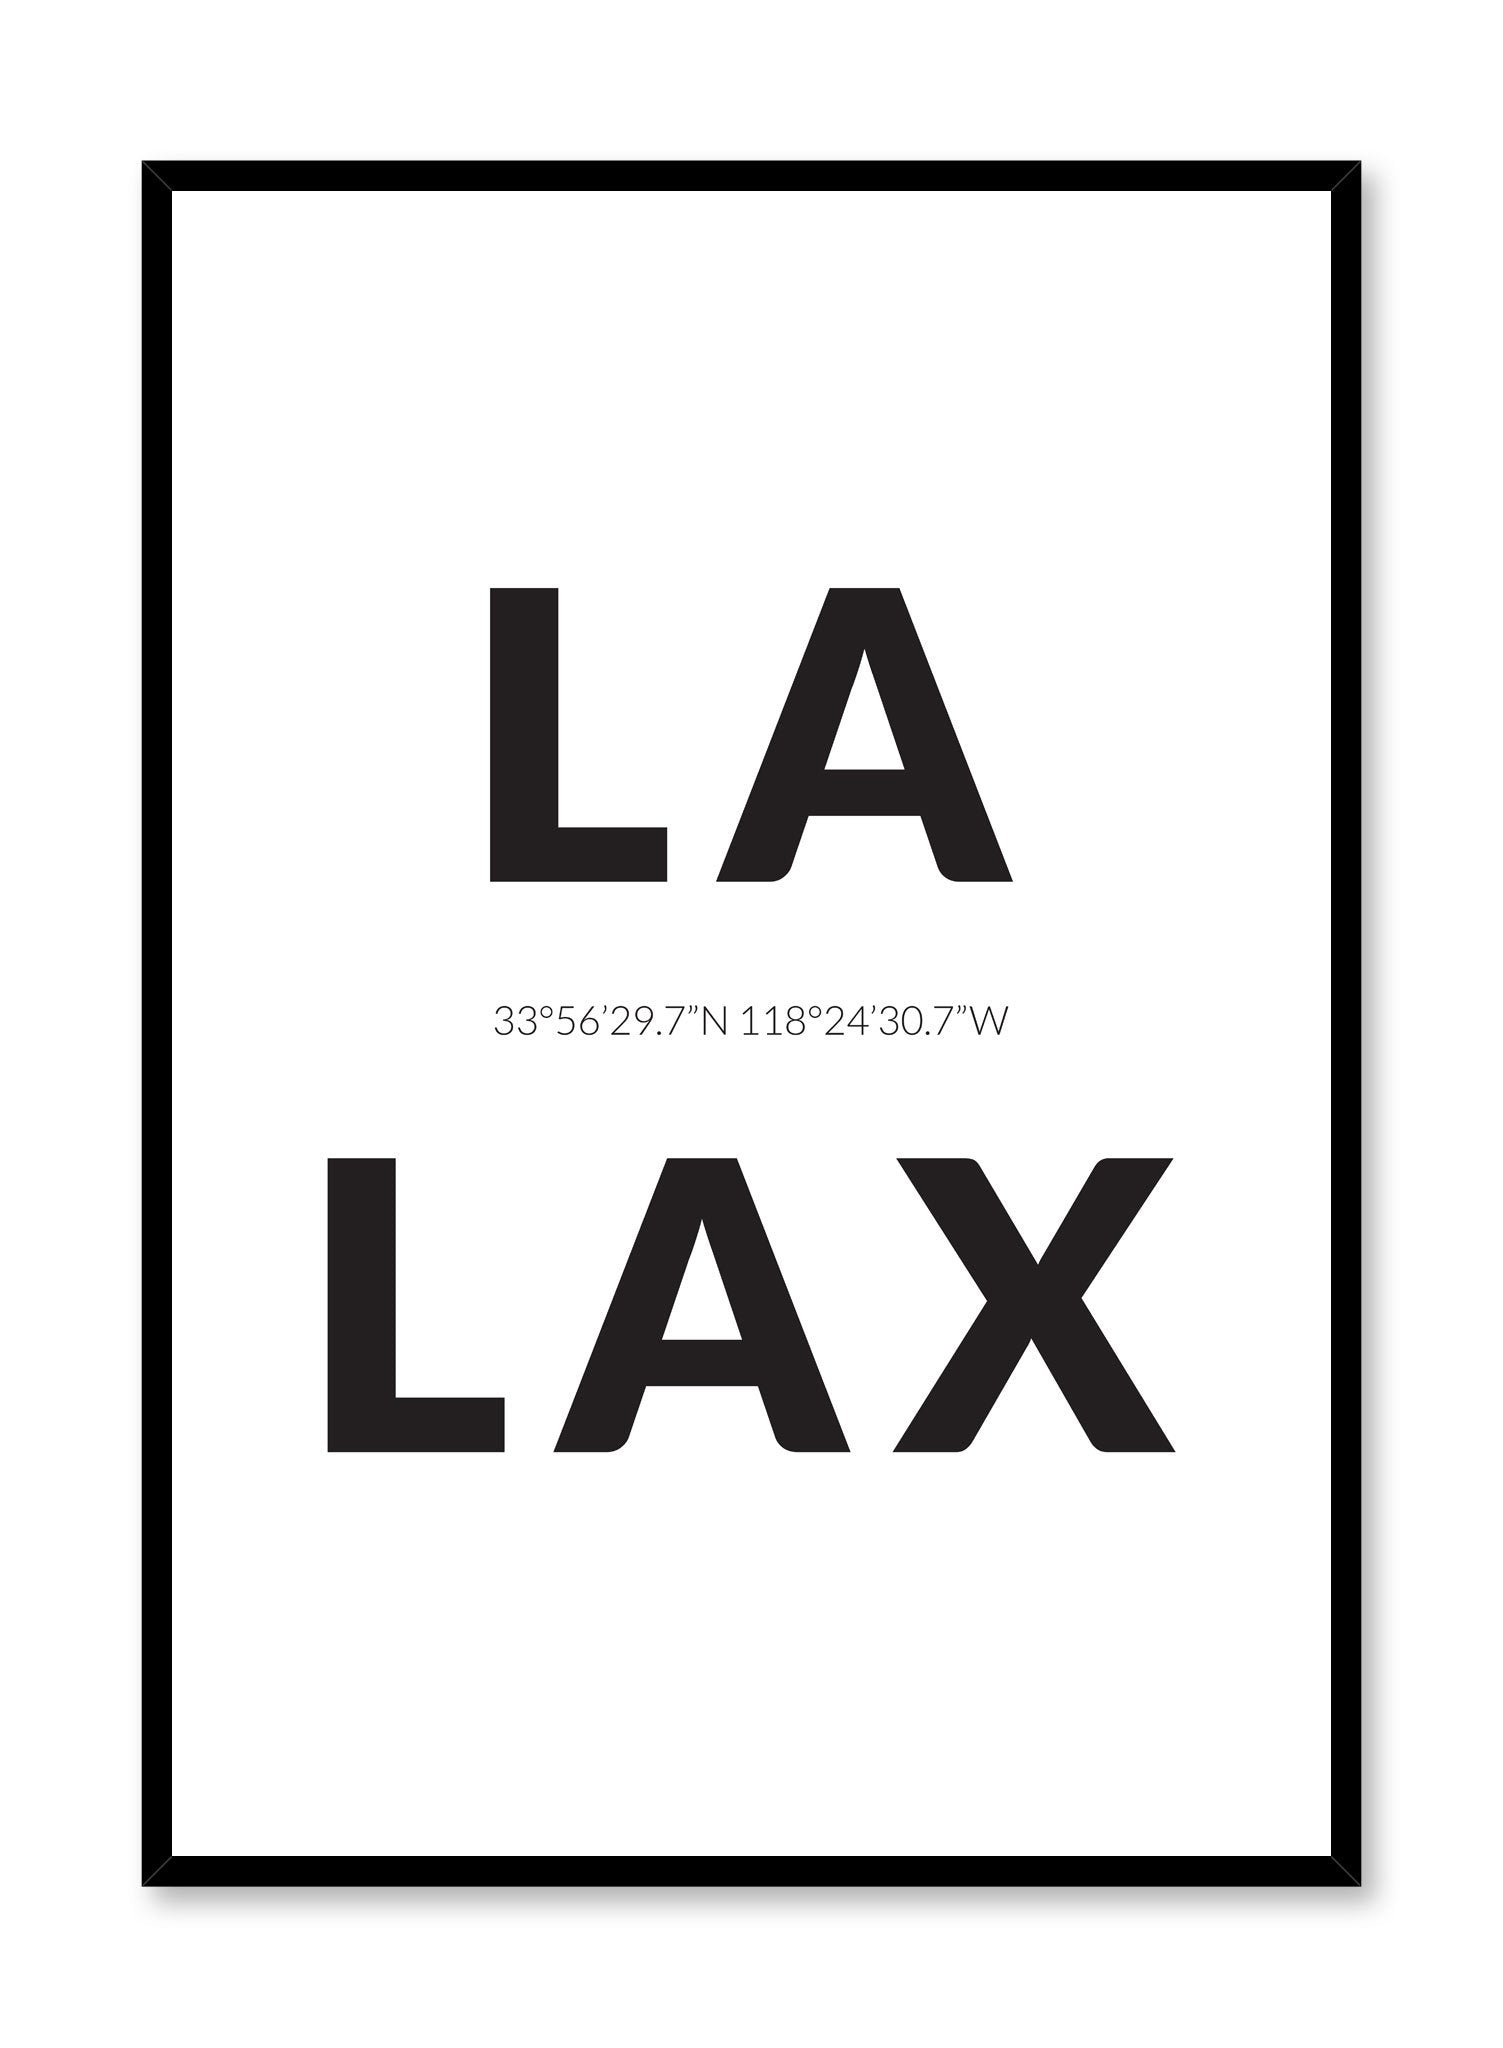 Minimalist design poster by Opposite Wall with airport code Los Angeles LAX